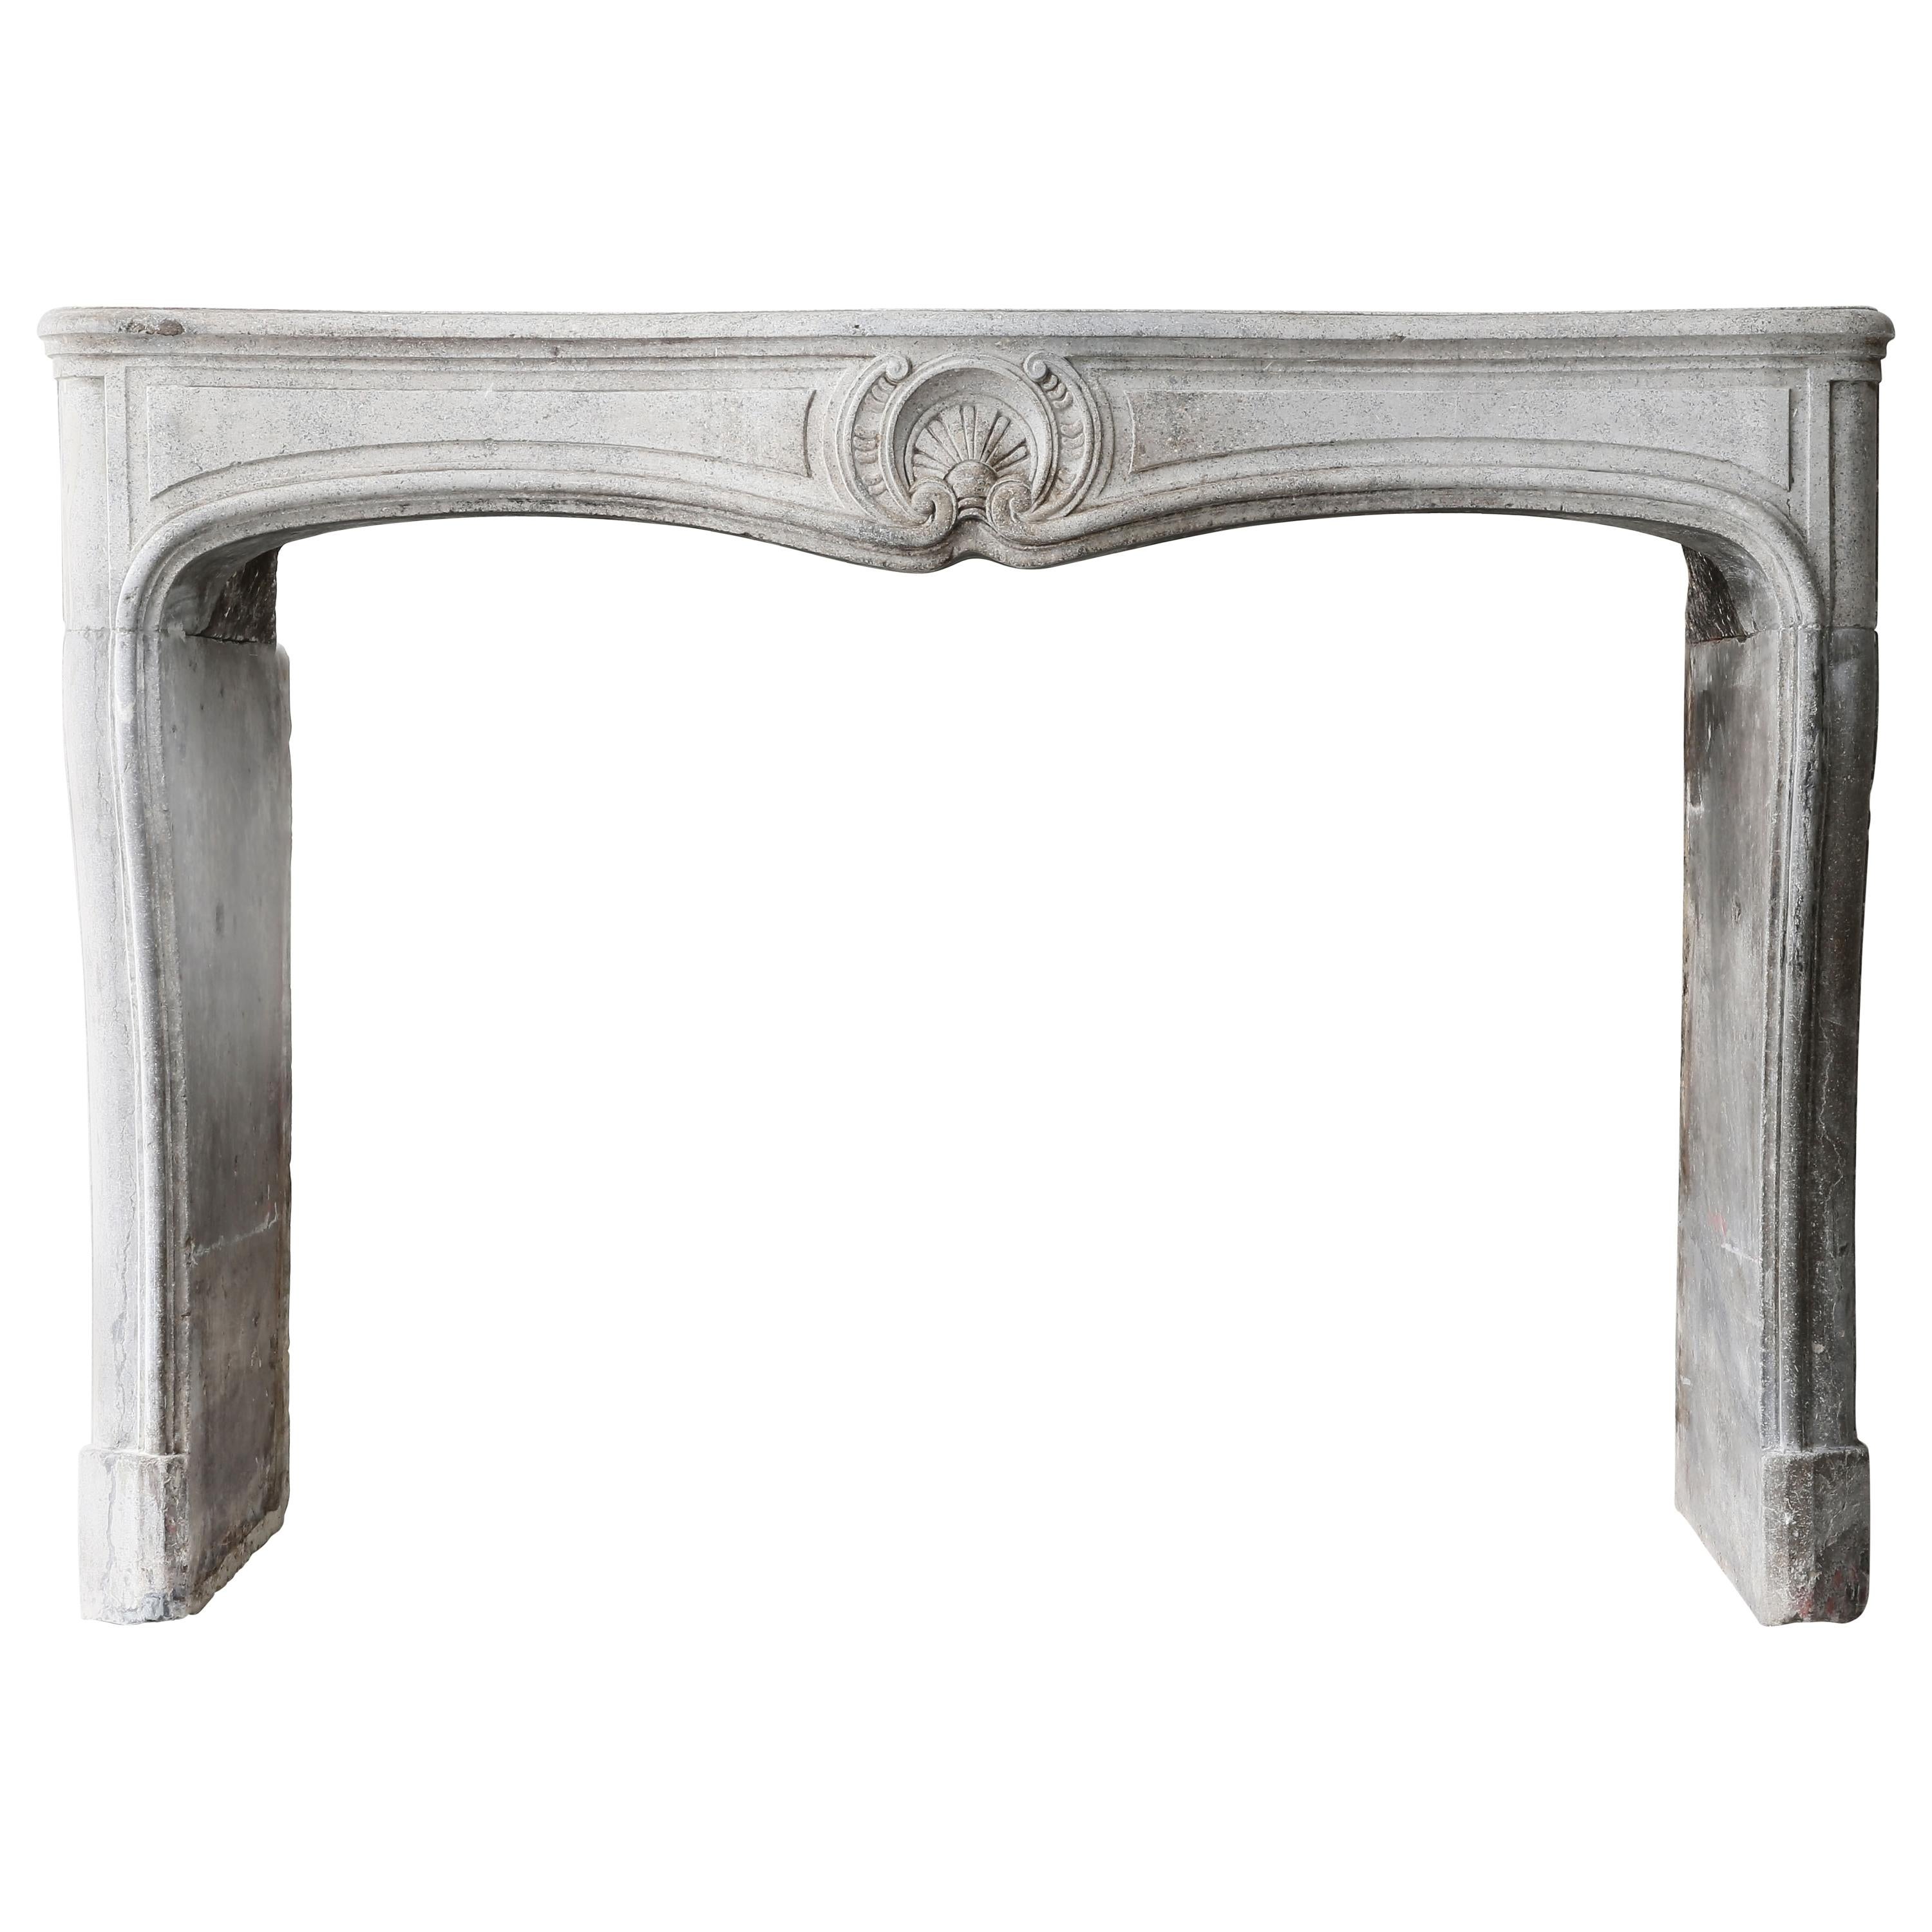 Antique Fireplace of Grey Marble Stone, 19th Century, Louis XV